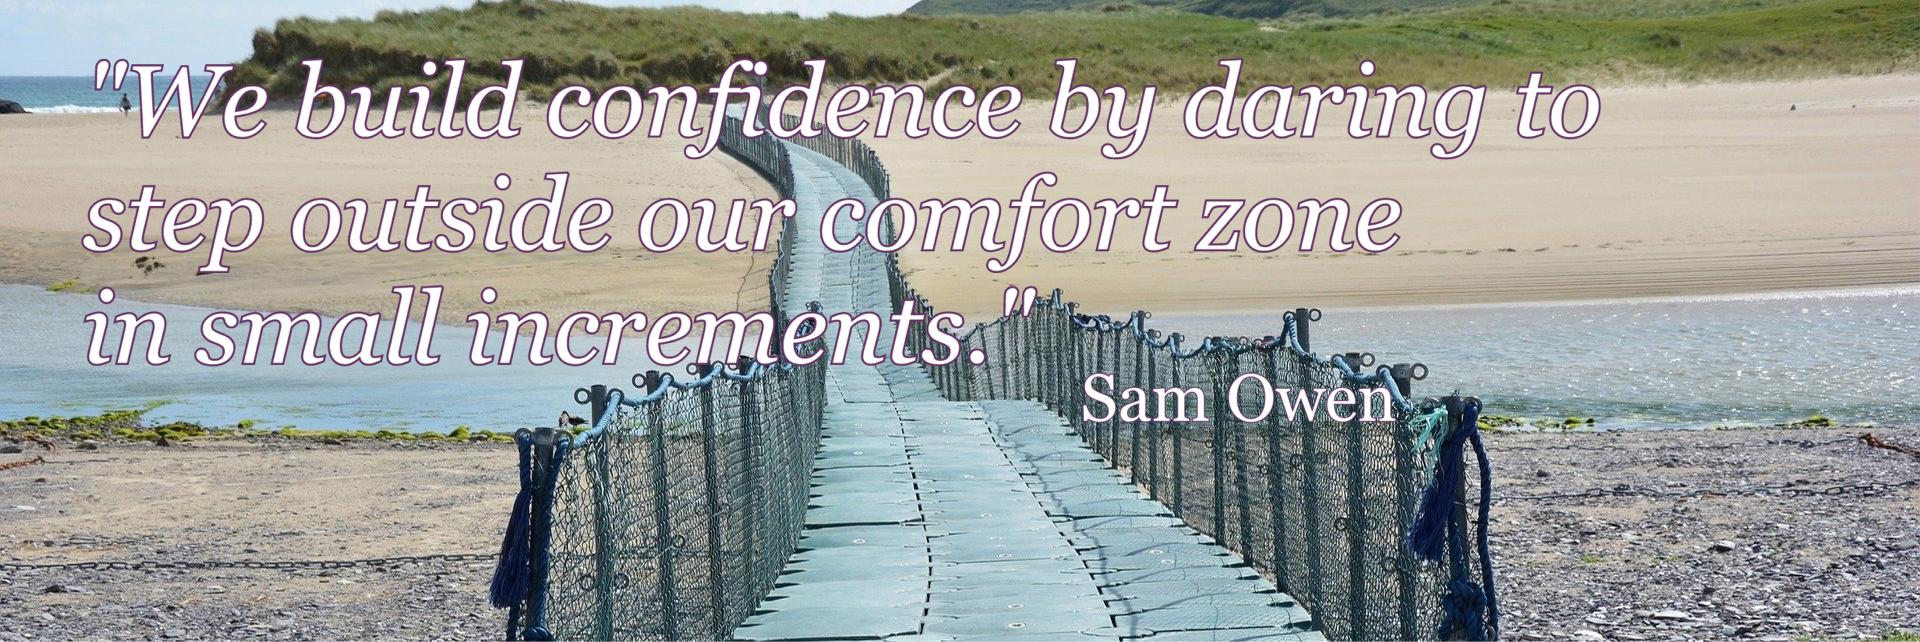 "We build confidence by daring to  step outside our comfort zone  in small increments."  - Sam Owen. DML Counselling & Psychotherapy, County Wexford, Ireland